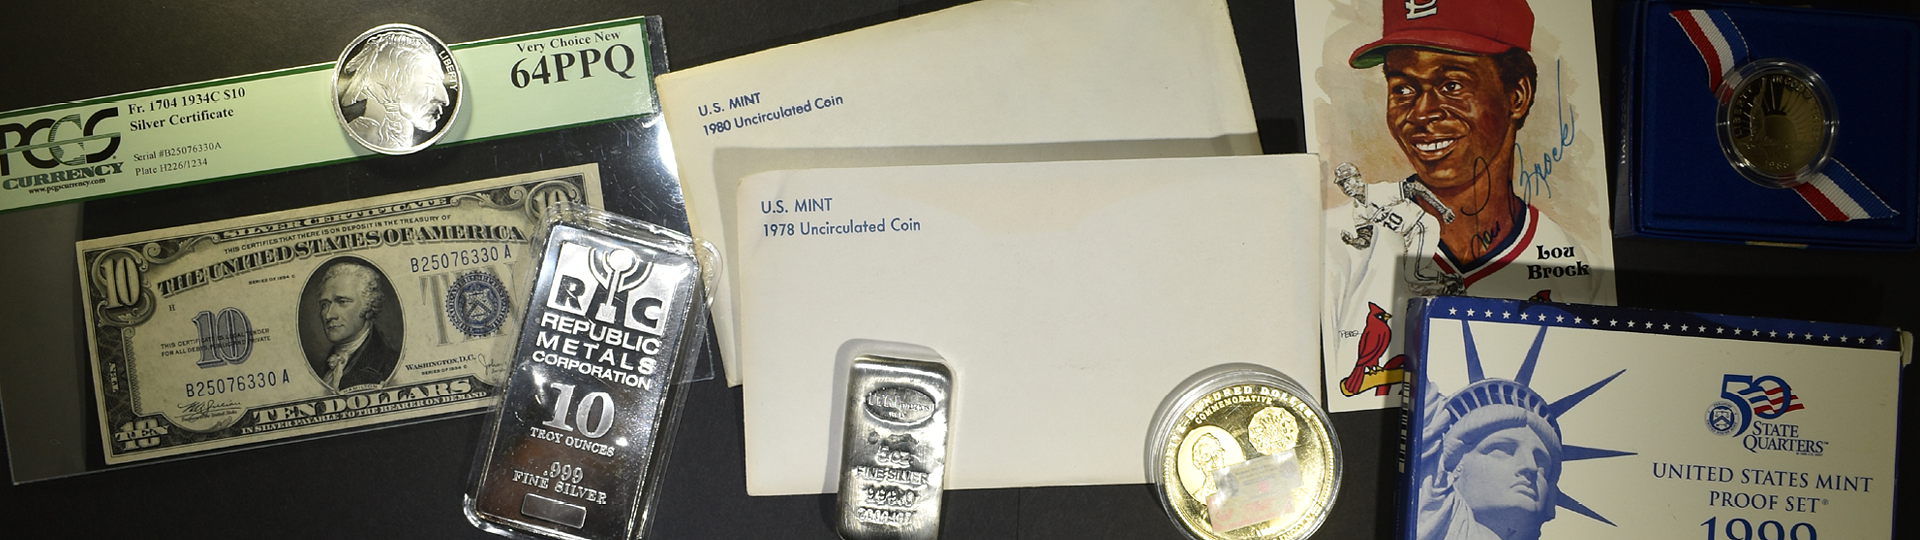 December 1st Silver City Rare Coin & Currency Auction by Silver City Auctions